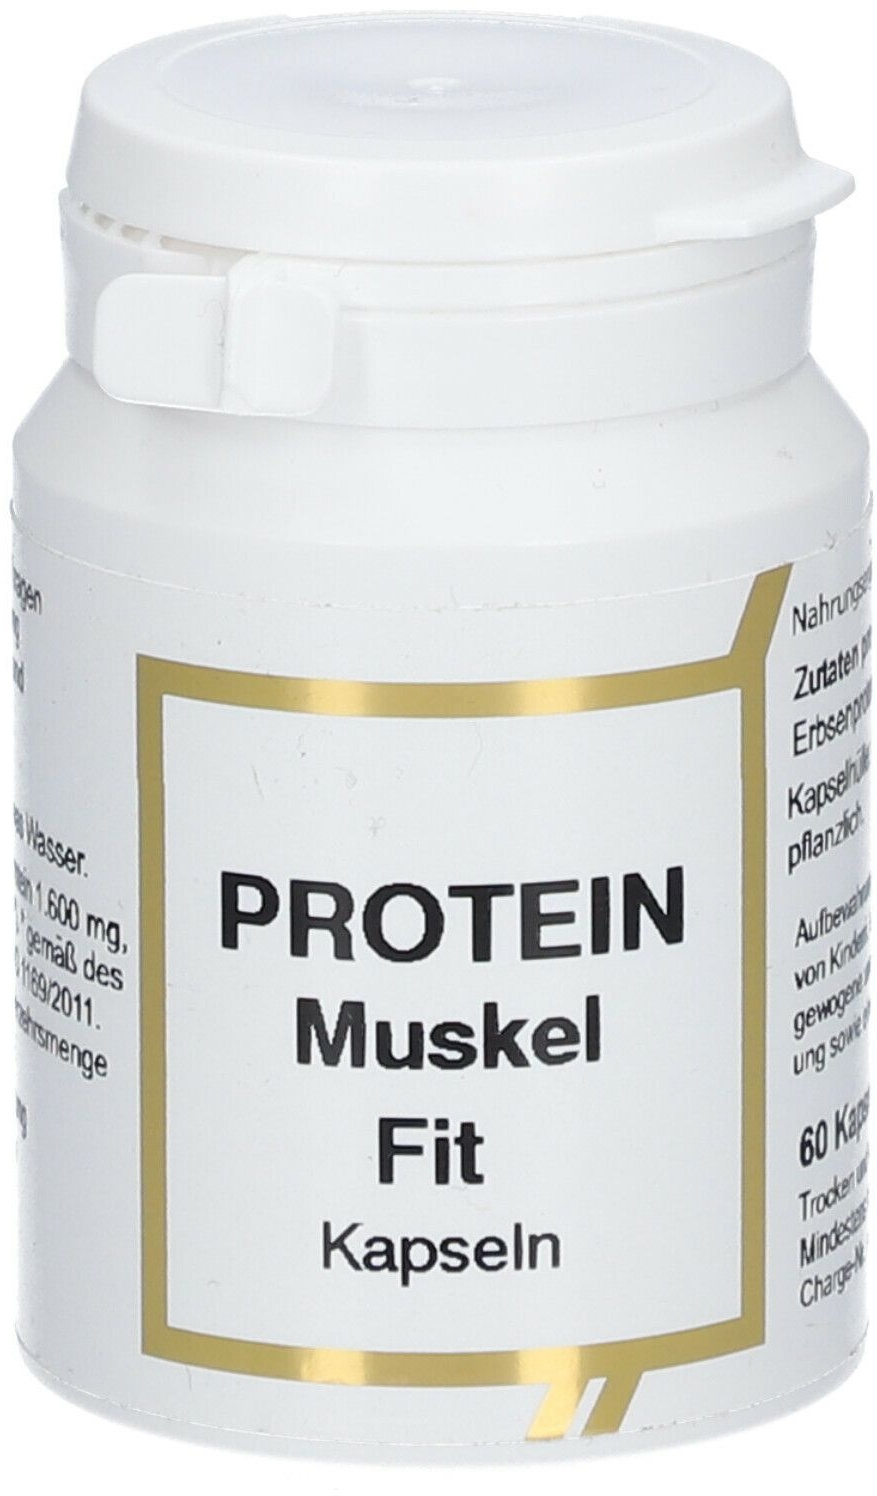 Protein Muskel Fit